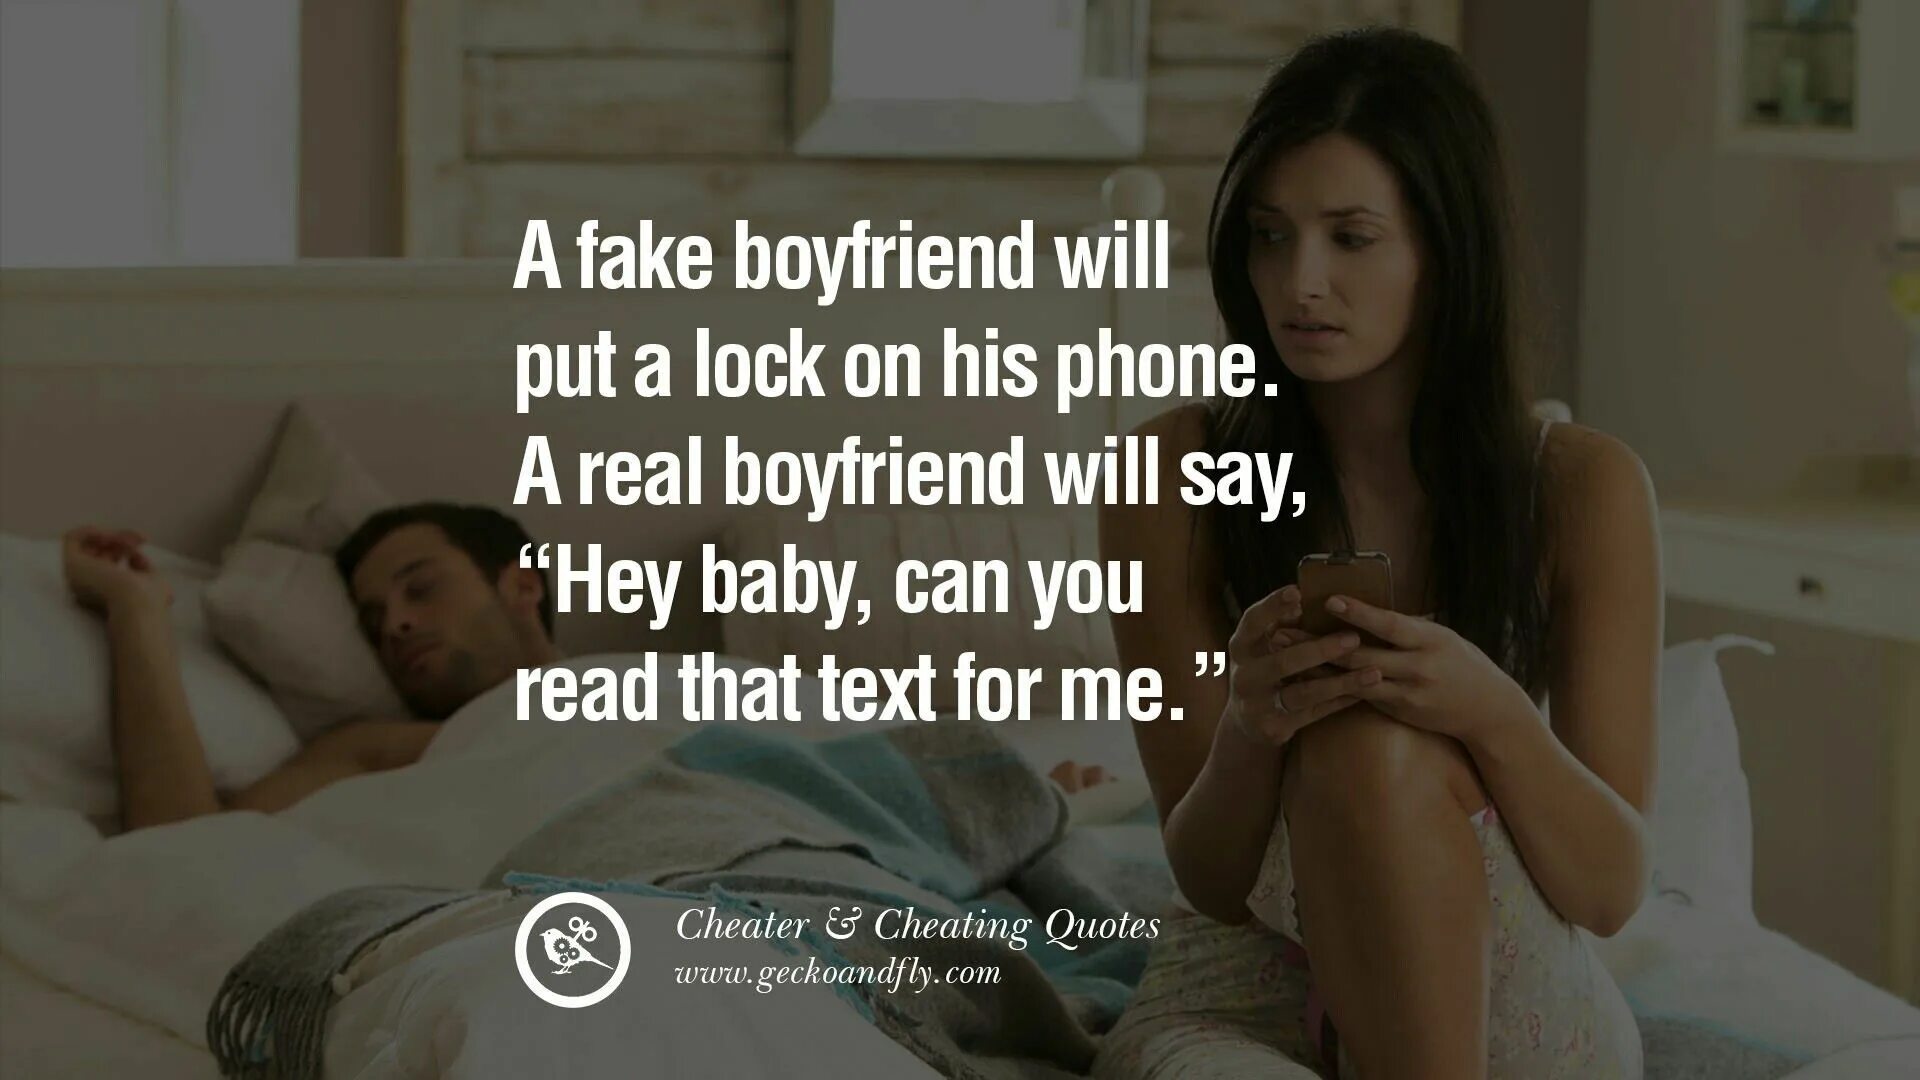 Cheating husband Cheat. Quotes about cheating. Cheating boyfriend. Cheating on boyfriend. Wife s cheat